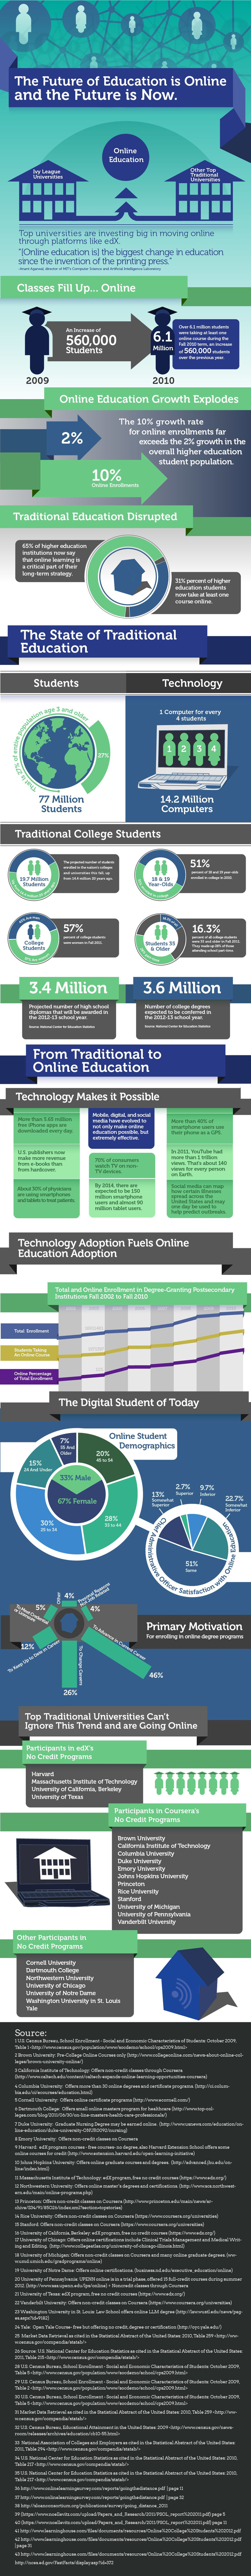 Why The Future of Education is Online Infographic